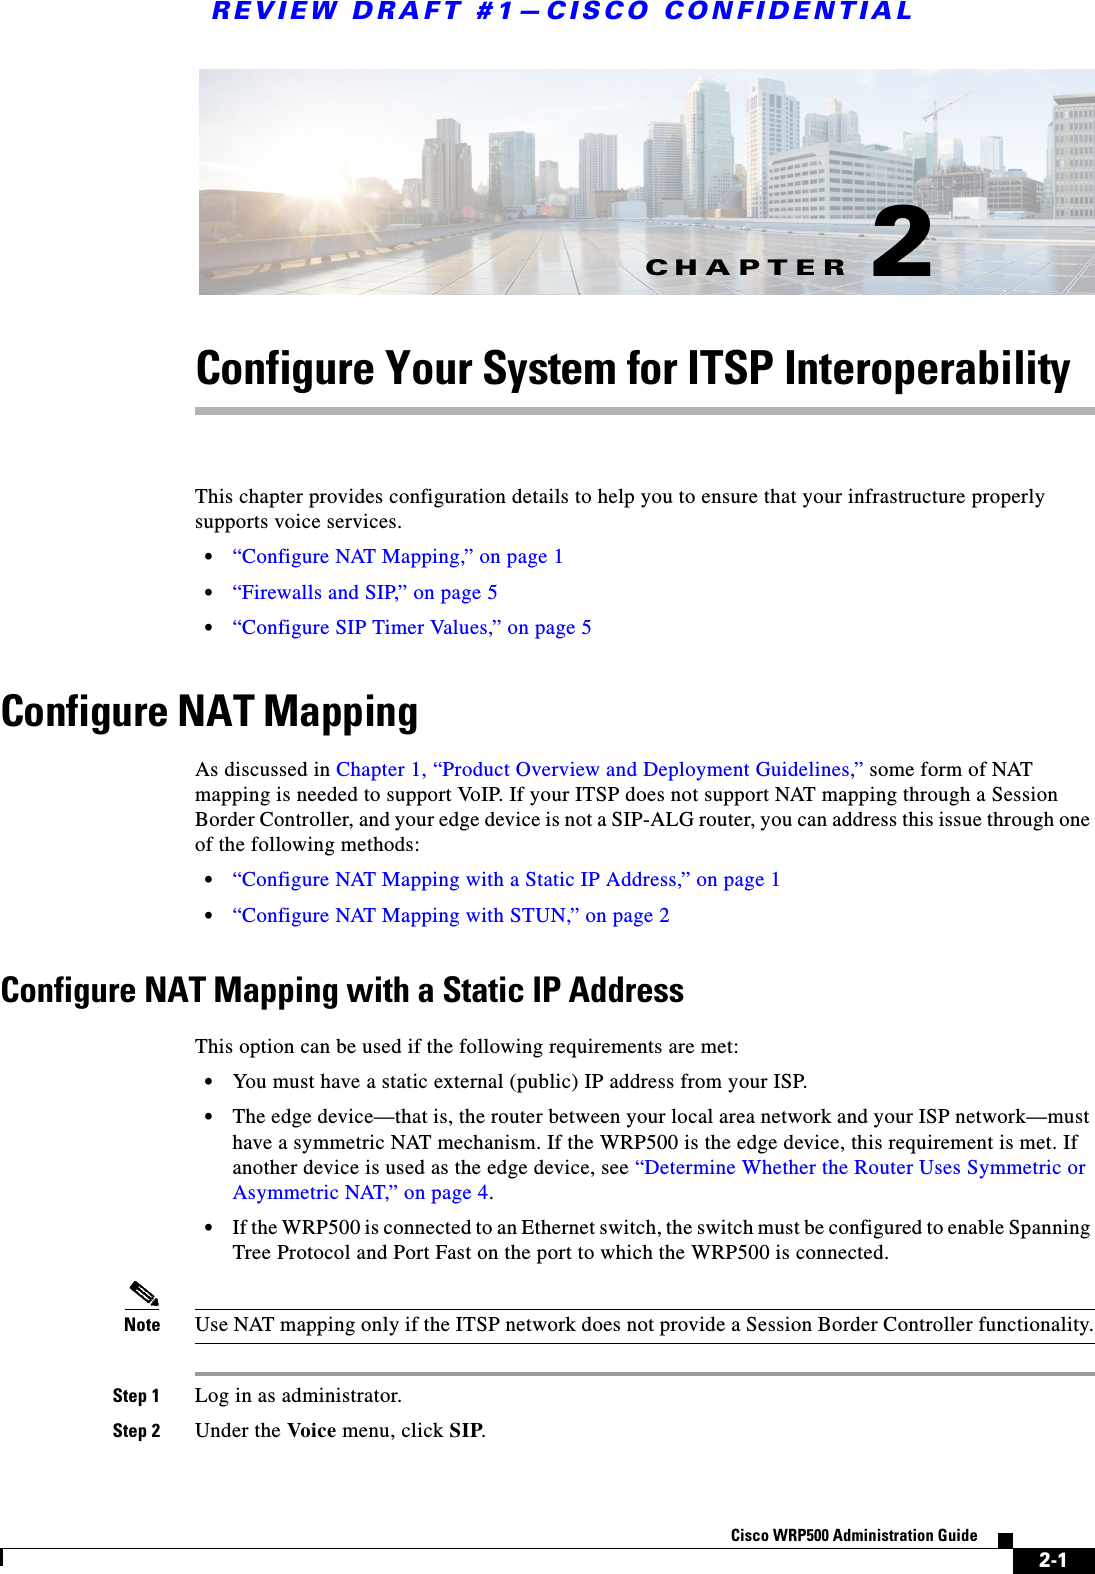 CHAPTERREVIEW DRAFT #1—CISCO CONFIDENTIAL2-1Cisco WRP500 Administration Guide 2Configure Your System for ITSP InteroperabilityThis chapter provides configuration details to help you to ensure that your infrastructure properly supports voice services.•“Configure NAT Mapping,” on page 1•“Firewalls and SIP,” on page 5•“Configure SIP Timer Values,” on page 5Configure NAT MappingAs discussed in Chapter 1, “Product Overview and Deployment Guidelines,” some form of NAT mapping is needed to support VoIP. If your ITSP does not support NAT mapping through a Session Border Controller, and your edge device is not a SIP-ALG router, you can address this issue through one of the following methods:•“Configure NAT Mapping with a Static IP Address,” on page 1•“Configure NAT Mapping with STUN,” on page 2Configure NAT Mapping with a Static IP AddressThis option can be used if the following requirements are met:•You must have a static external (public) IP address from your ISP.•The edge device—that is, the router between your local area network and your ISP network—must have a symmetric NAT mechanism. If the WRP500 is the edge device, this requirement is met. If another device is used as the edge device, see “Determine Whether the Router Uses Symmetric or Asymmetric NAT,” on page 4.•If the WRP500 is connected to an Ethernet switch, the switch must be configured to enable Spanning Tree Protocol and Port Fast on the port to which the WRP500 is connected.Note Use NAT mapping only if the ITSP network does not provide a Session Border Controller functionality.Step 1 Log in as administrator.Step 2 Under the Voice menu, click SIP.